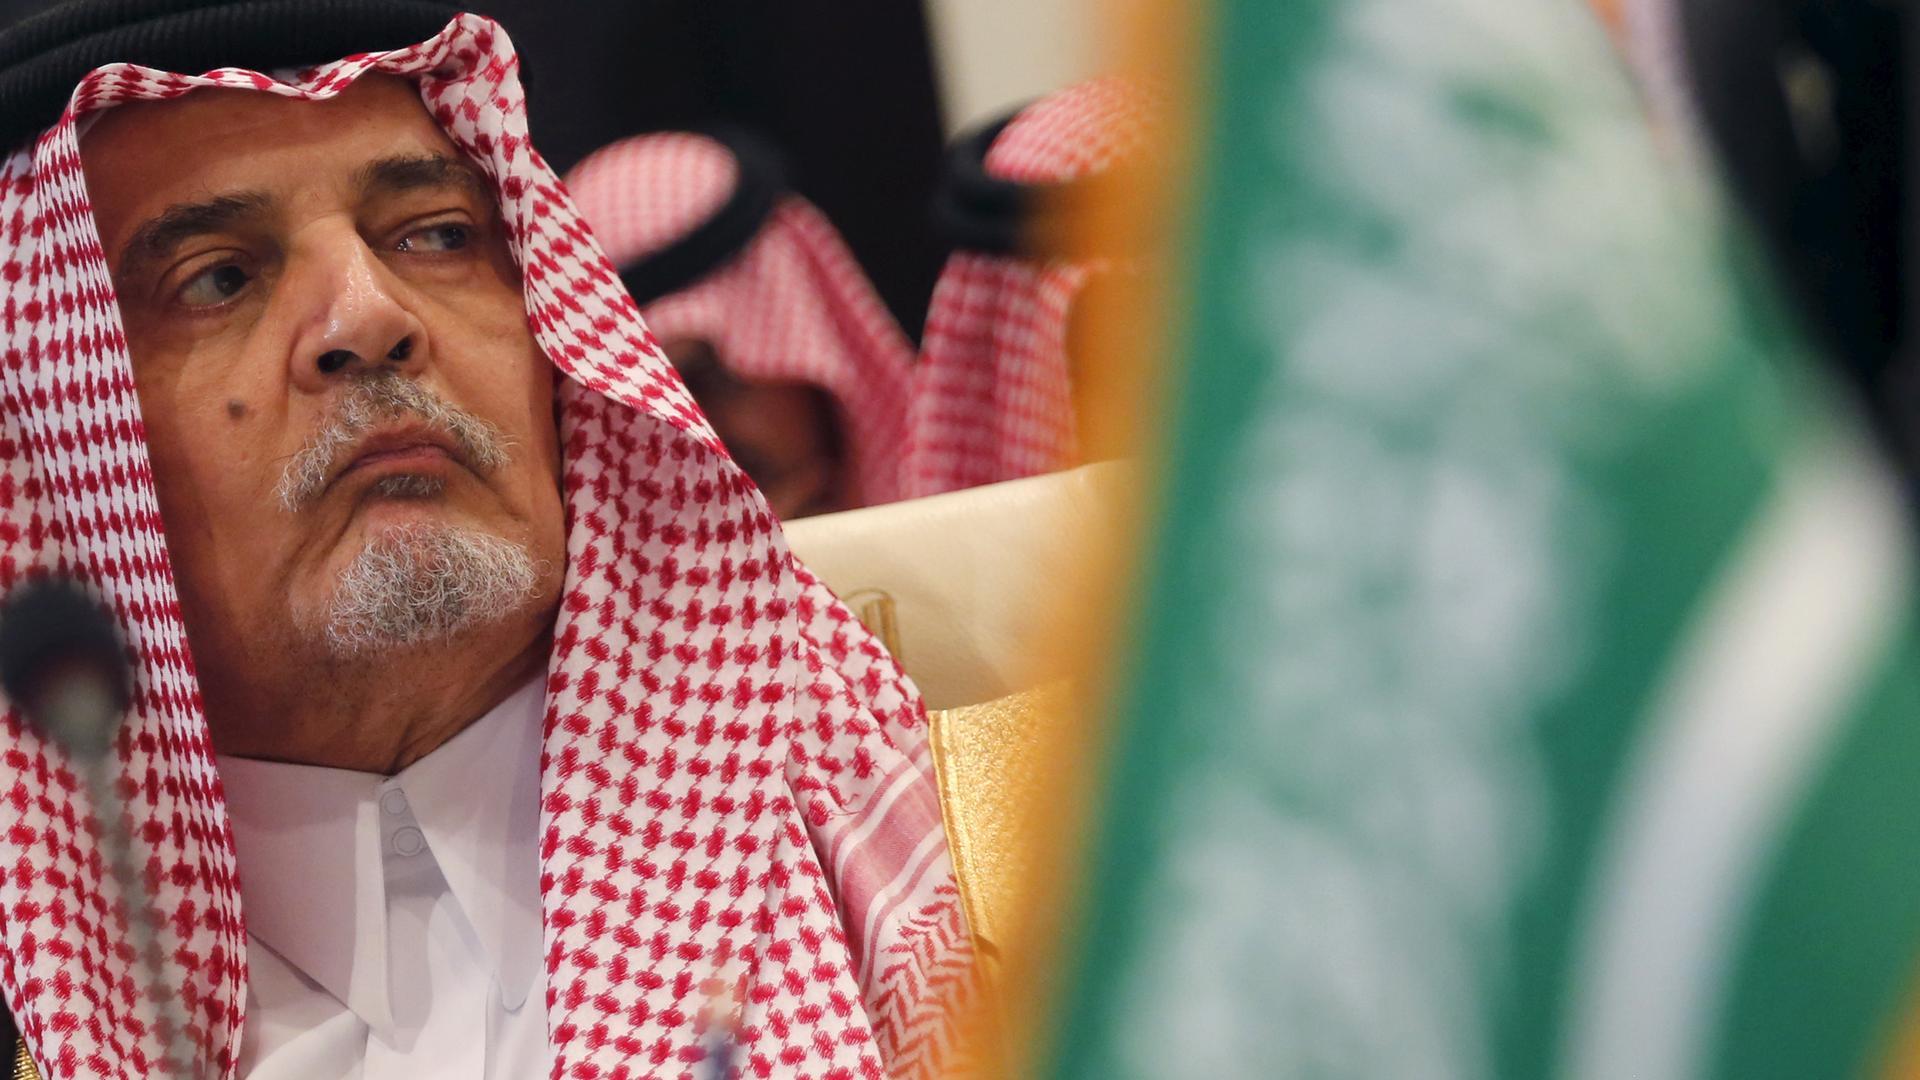 Saudi Arabia's foreign minister, Prince Saud al-Faisal, attends a meeting of Arab League foreign ministers in Sharm el-Sheikh, Egypt, on March 26, 2015.